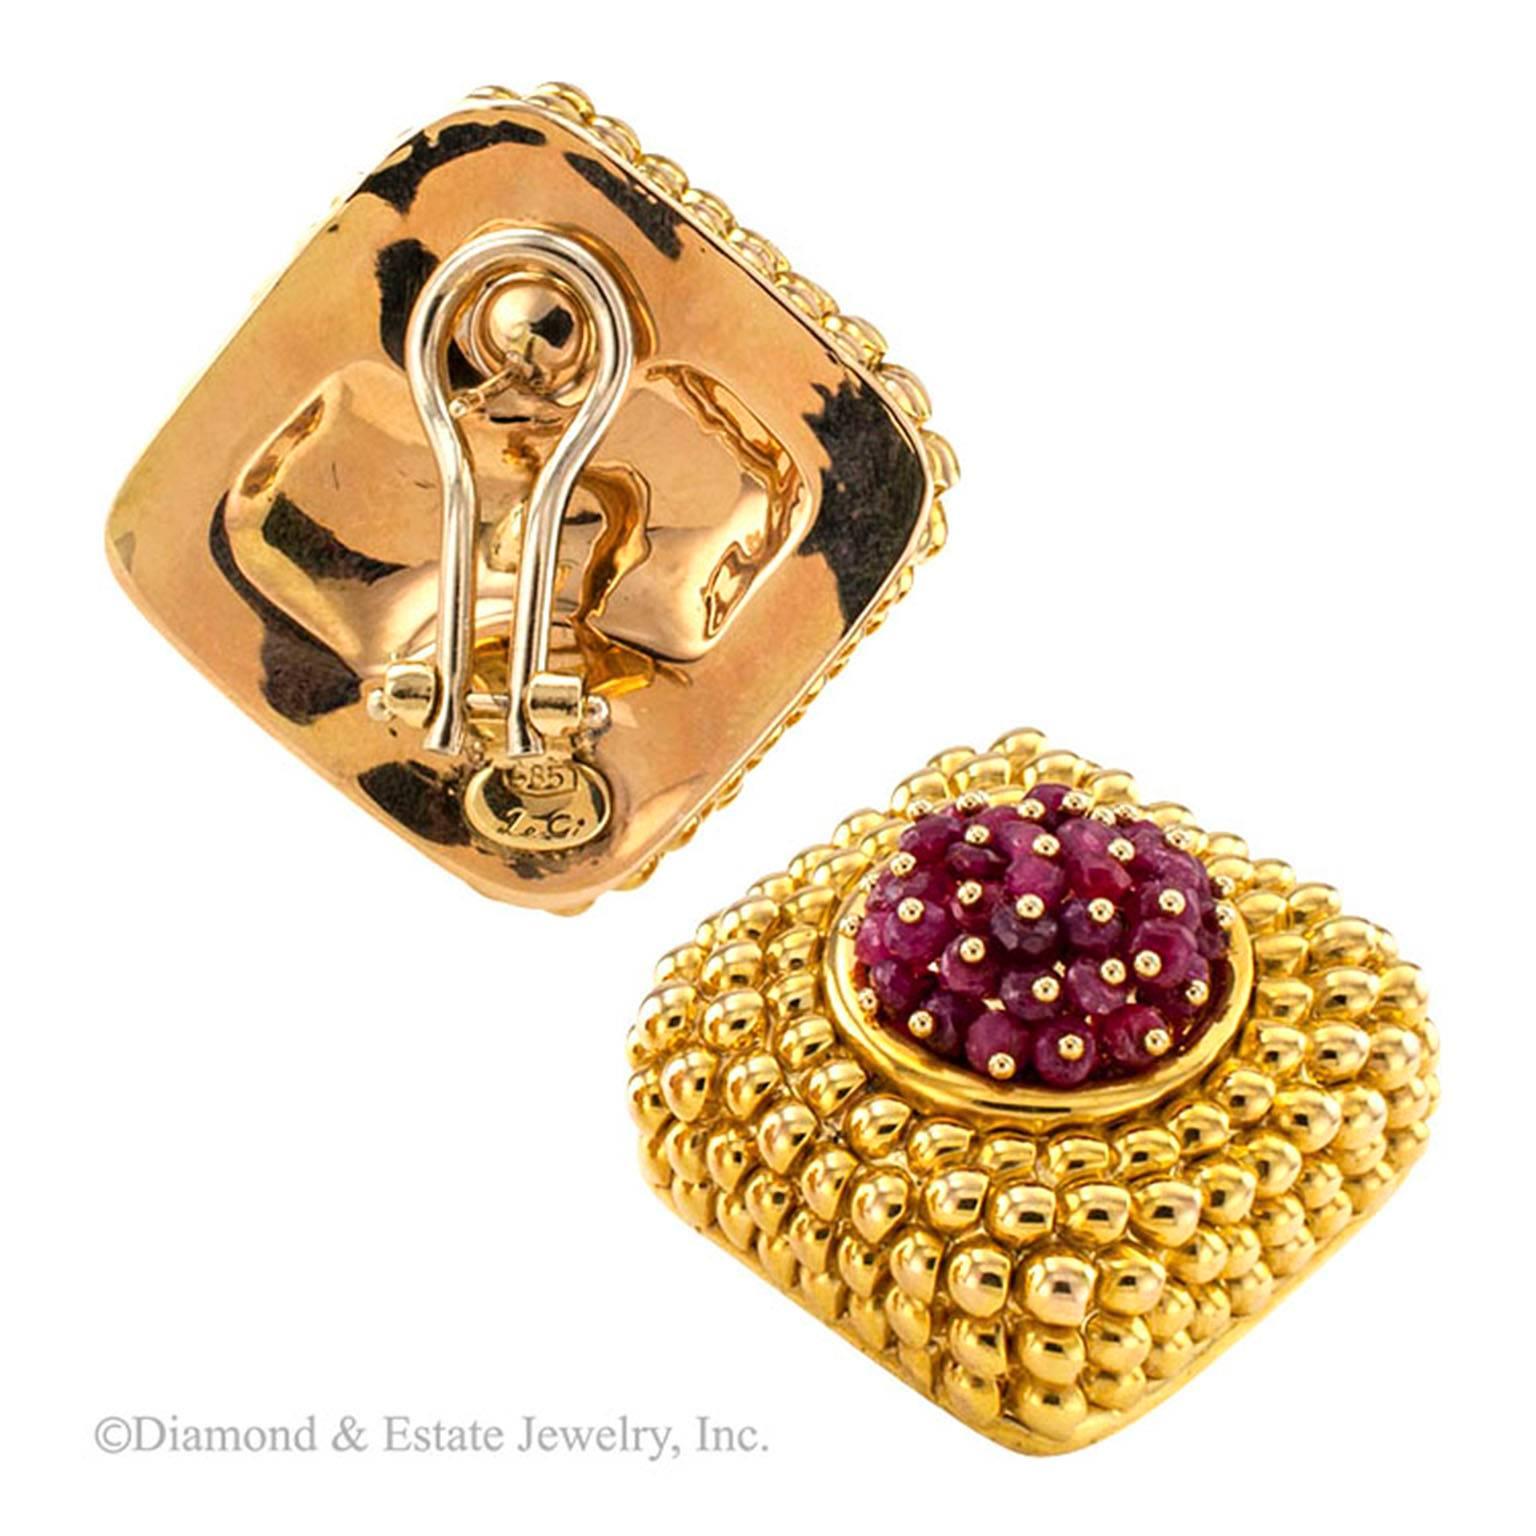 Ruby and Yellow Gold Estate Earrings

Candy like in appearance, these earrings are a radically different way to wear ruby and gold together.  Those yummy looking centers are filled with randomly arranged, faceted ruby beads. Each is held in place